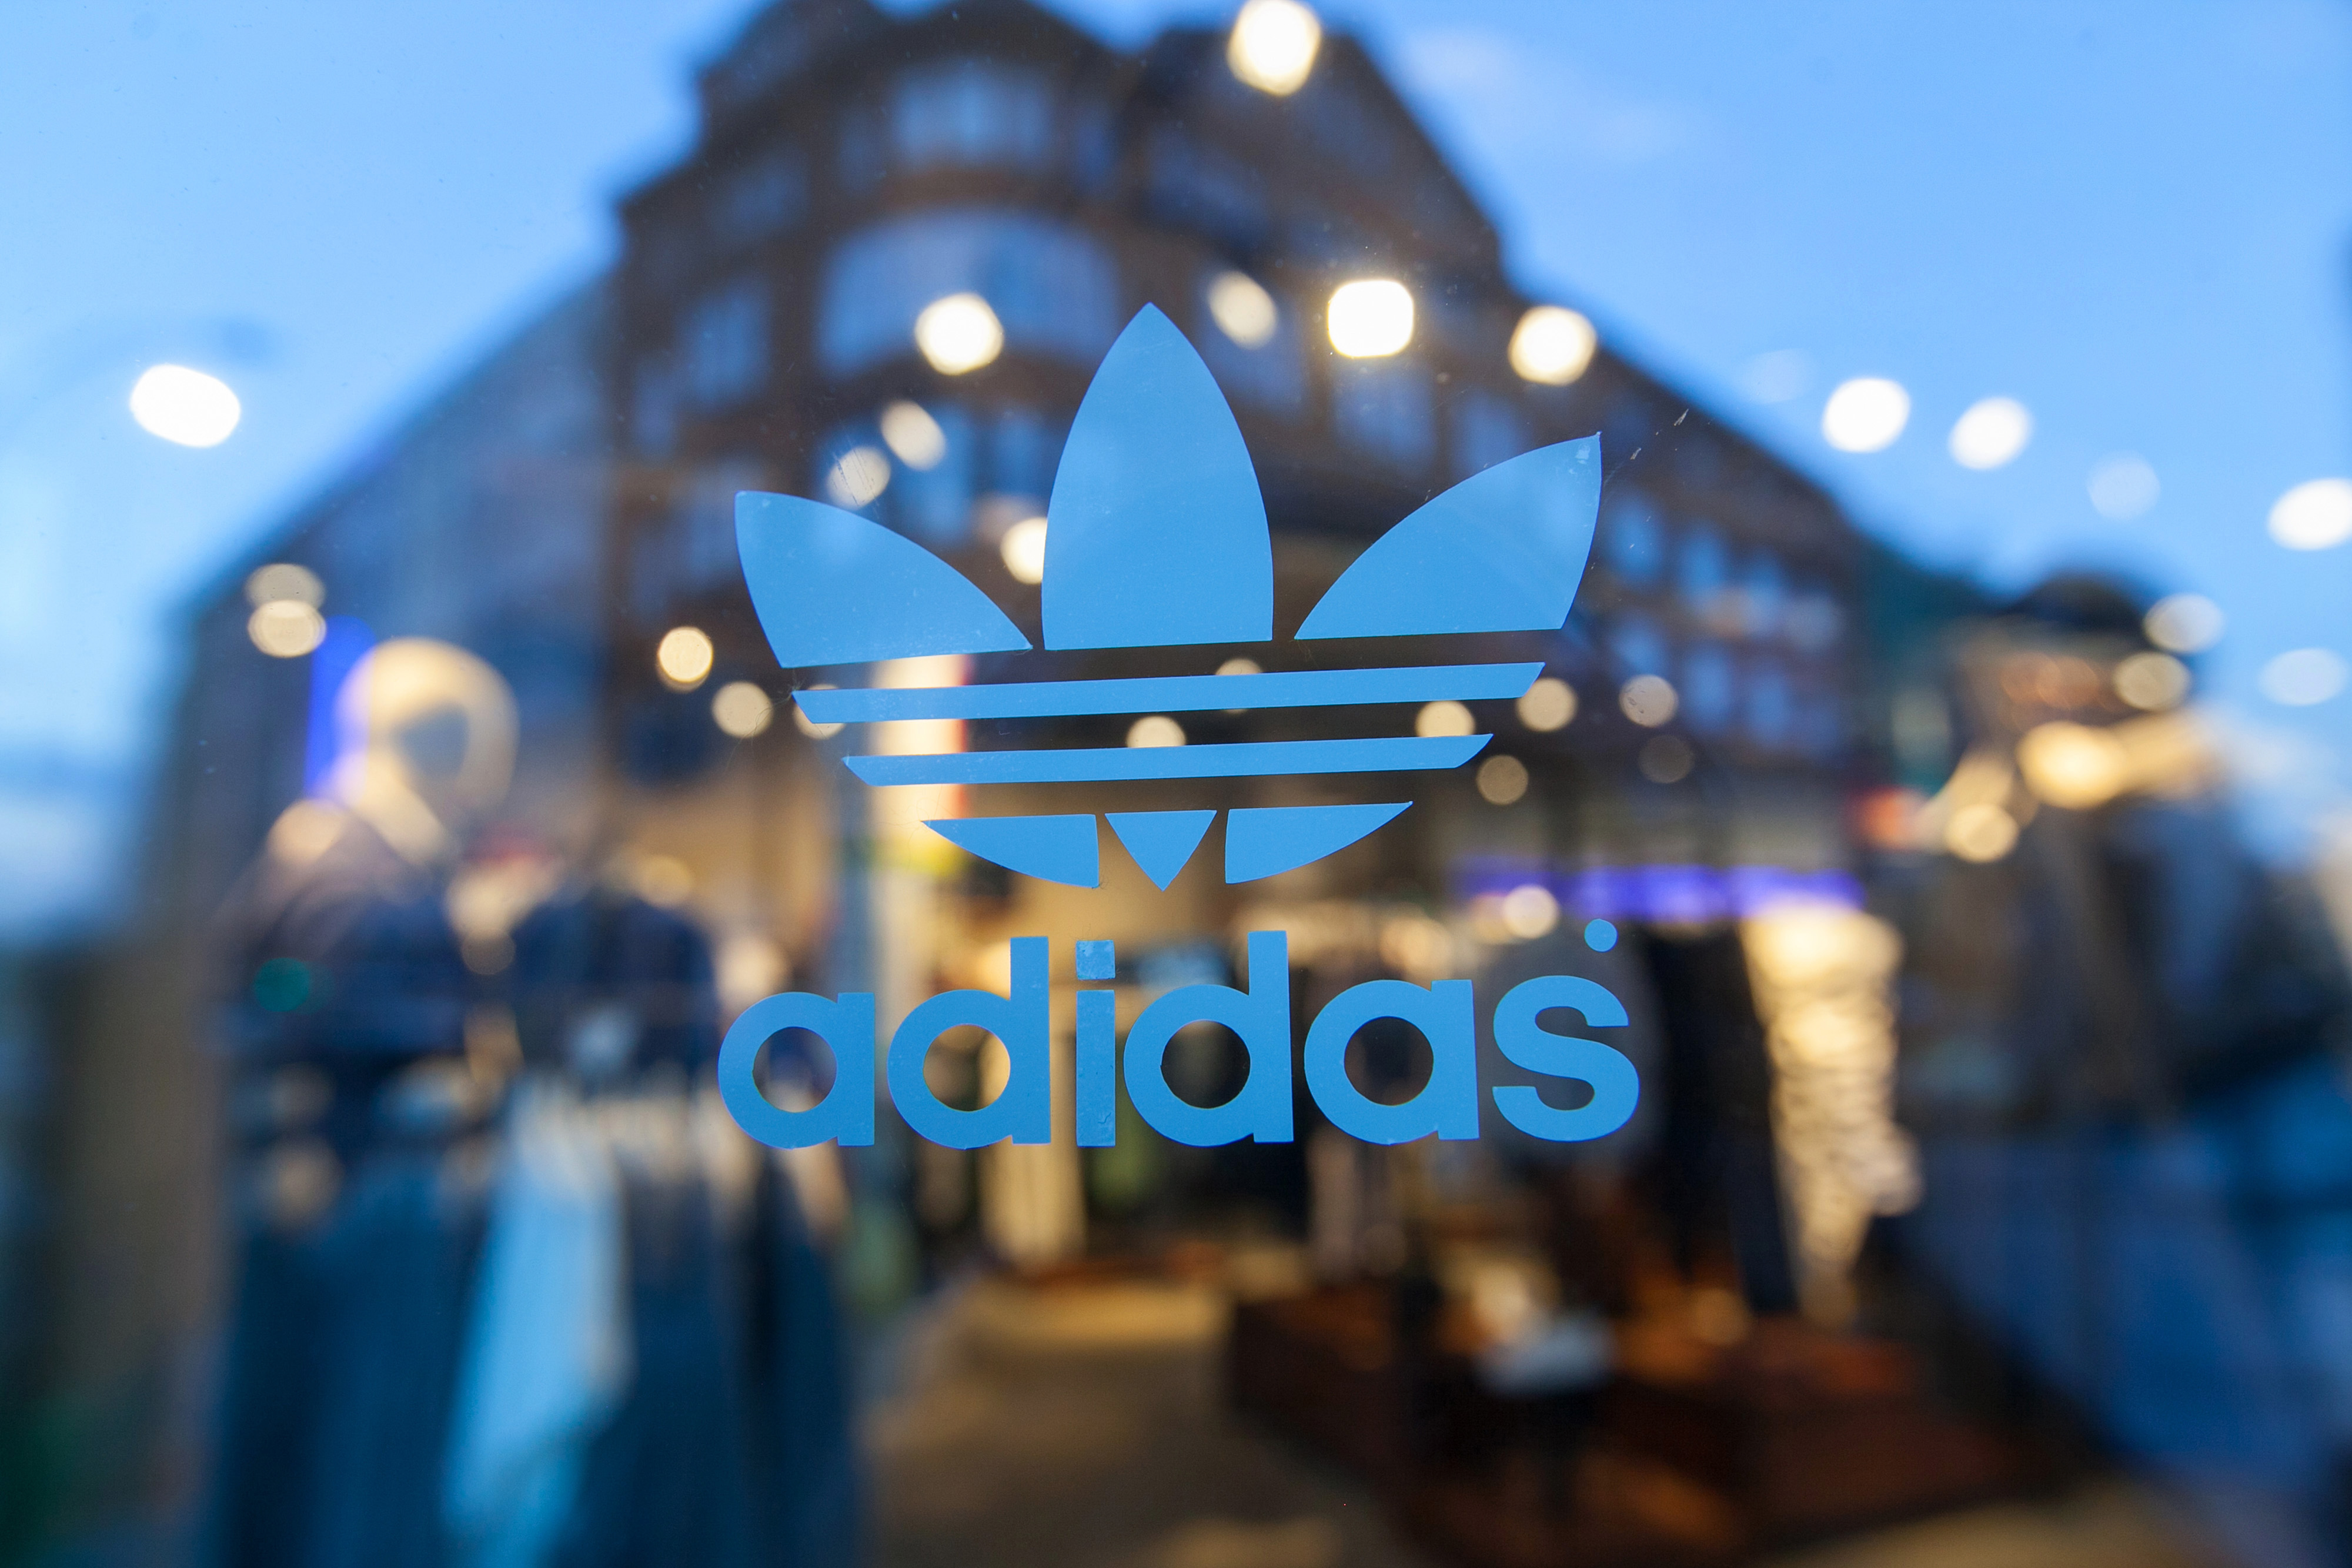 The Adidas logo sits on a window at an Adidas AG originals store in Berlin, Germany, on Wednesday, March 4, 2015. Adidas predicted profit growth for this year that matched analysts' predictions for the struggling German sportswear maker as it pours money into catching up to larger rival Nike Inc. in America. Photographer: Krisztian Bocsi/Bloomberg via Getty Images (Krisztian Bocsi—Bloomberg/Getty Images)